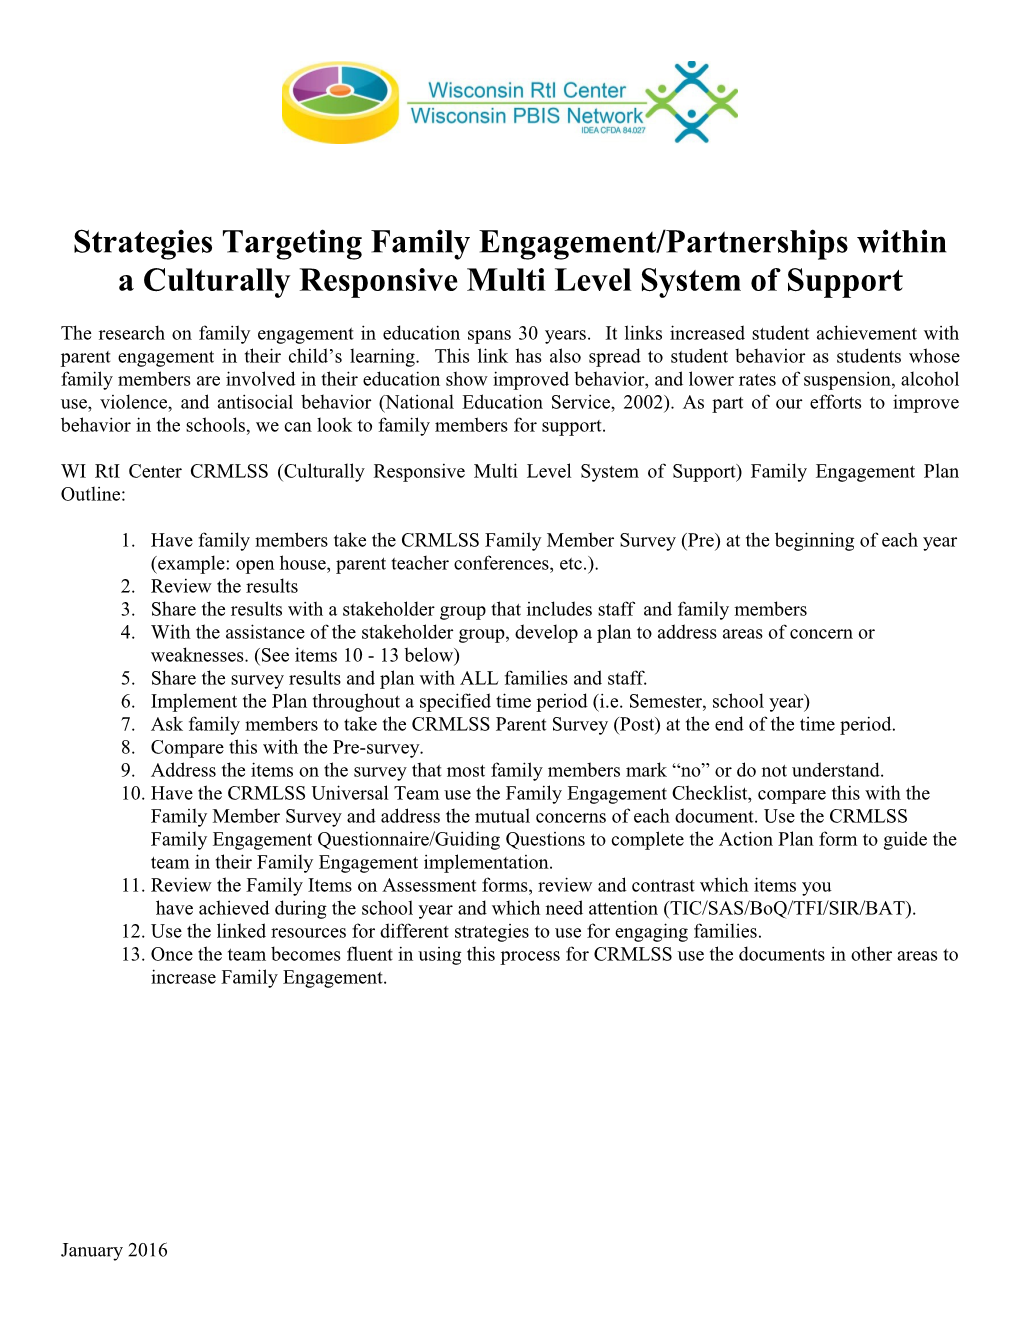 Strategies Targeting Family Engagement/Partnerships Within a Culturally Responsive Multi